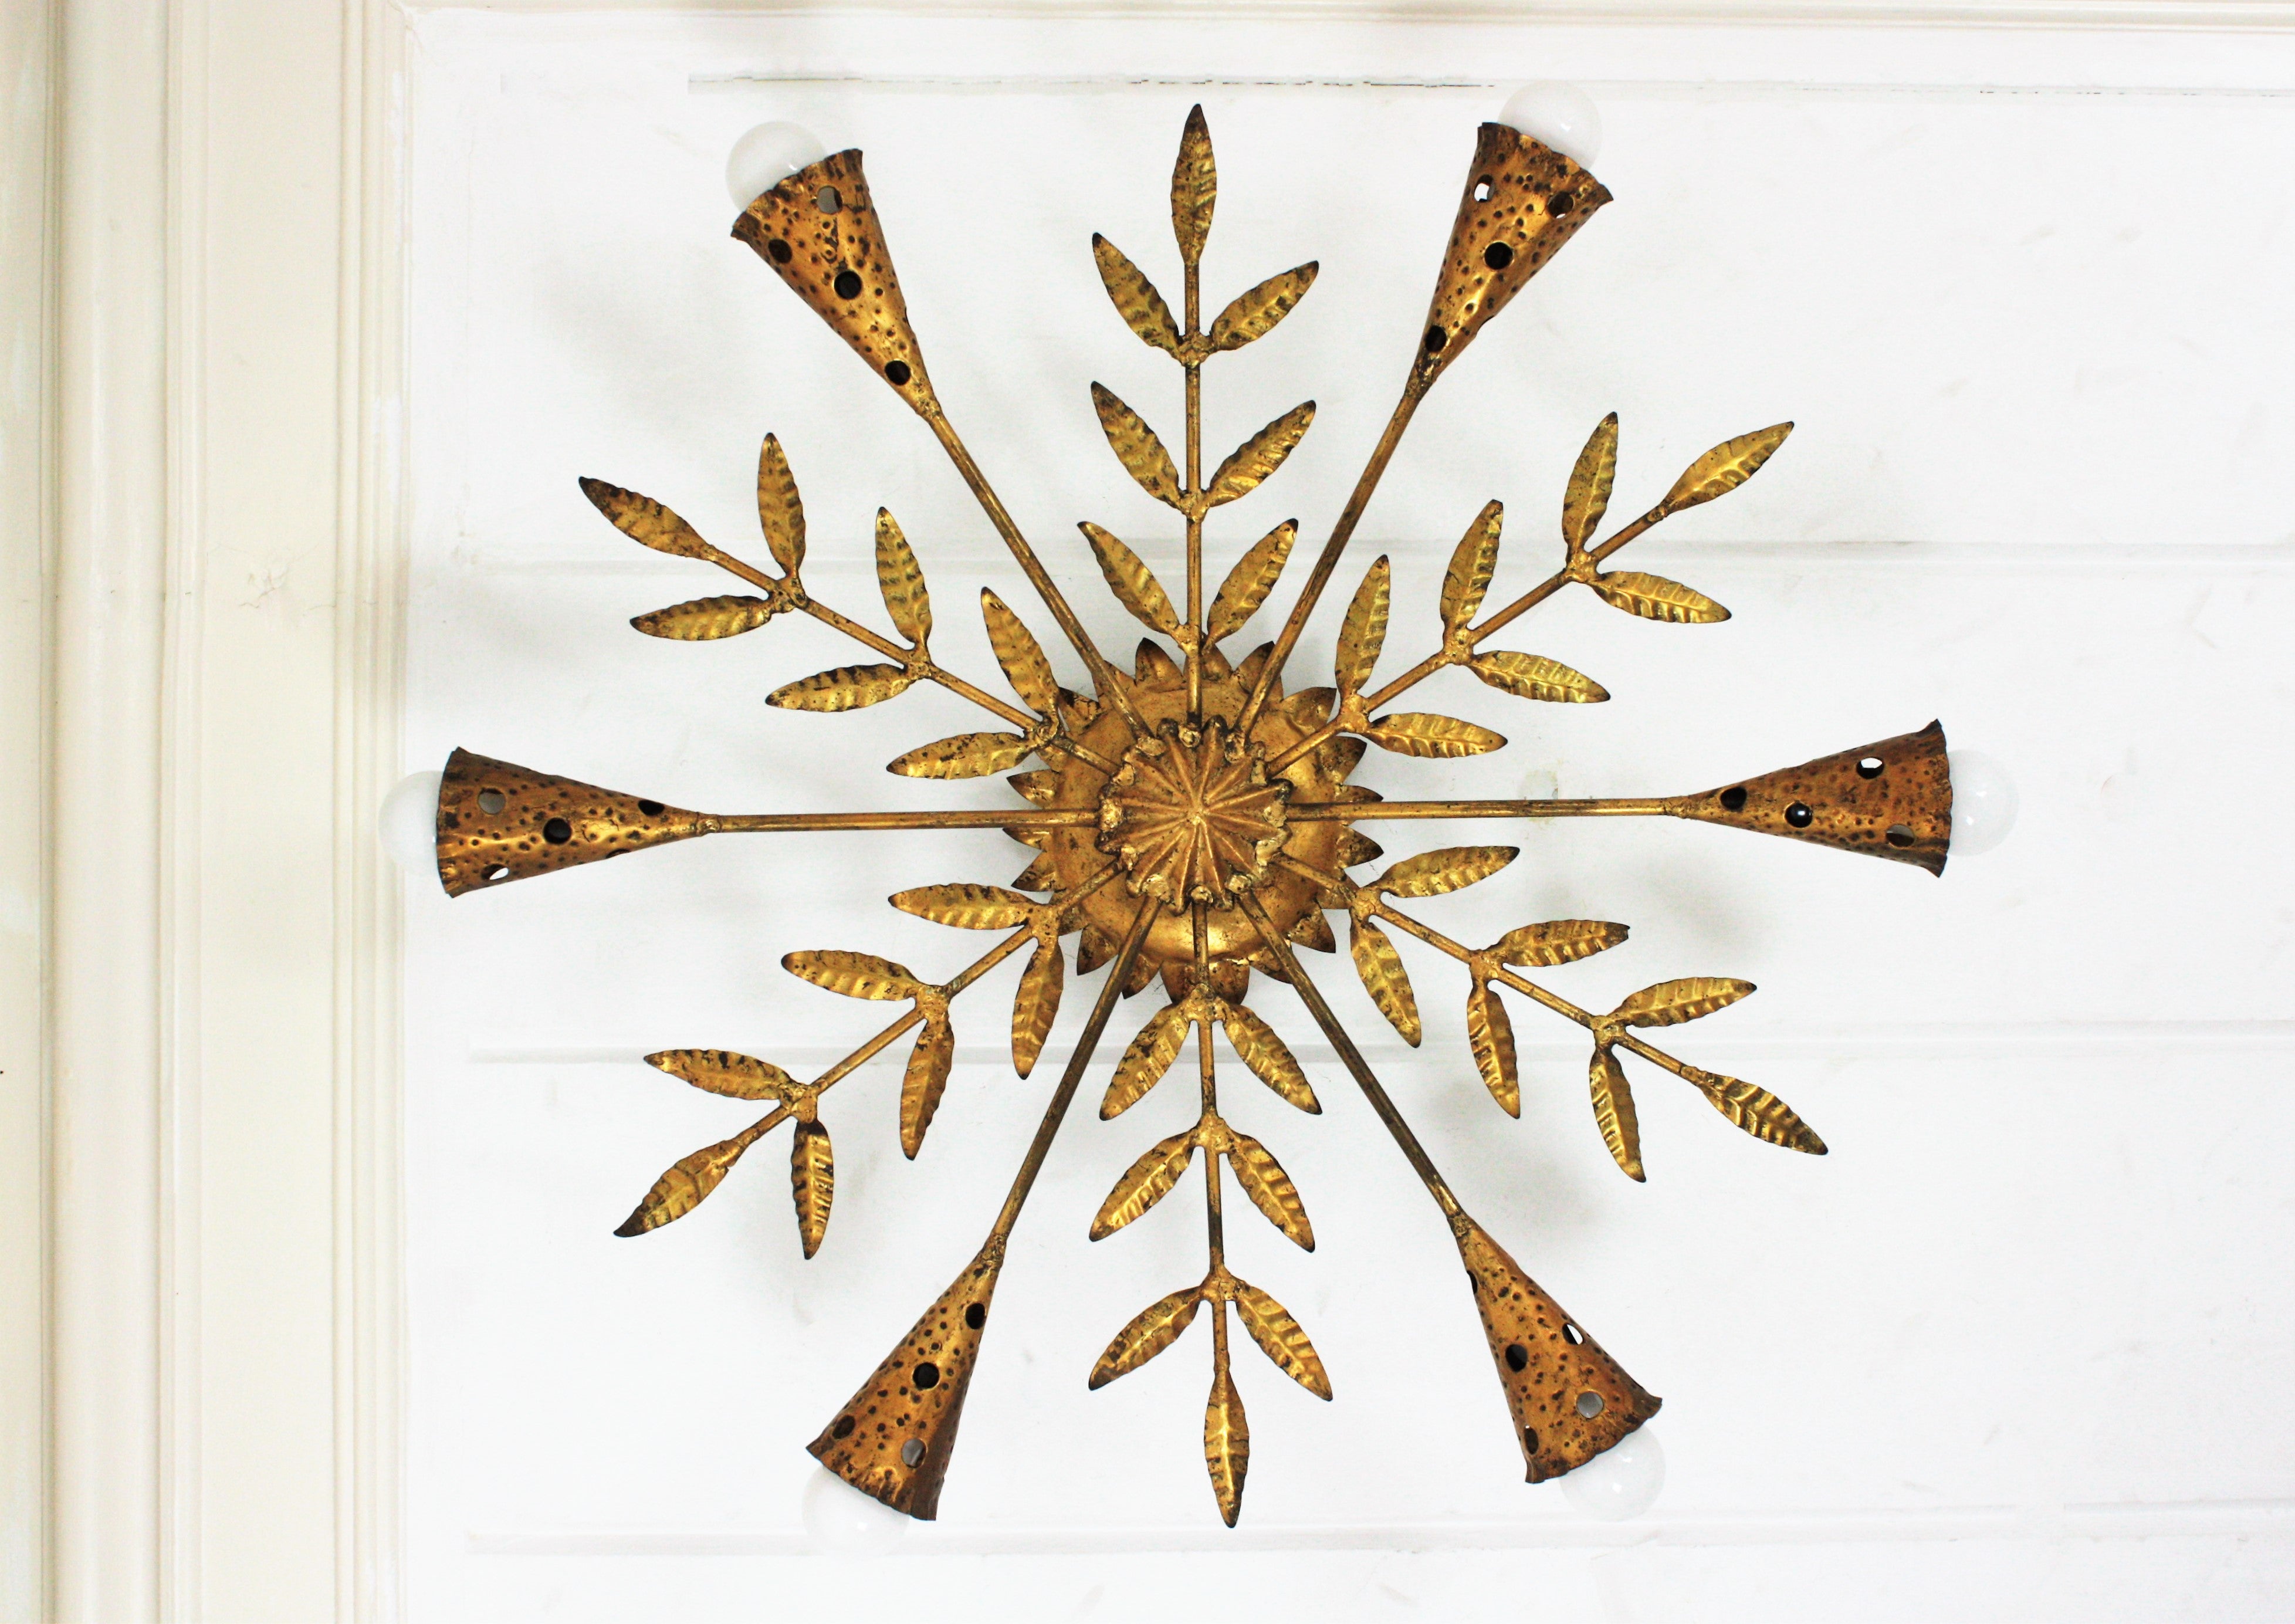 Outstanding spanish foliage sunburst flush mount ceiling light in gilt iron, Ferro Art, 1950s
Large size.
To be used as ceiling light fixture or as chandelier / pendant light adding a chain to the desired height.
This six-light ceiling lamp features